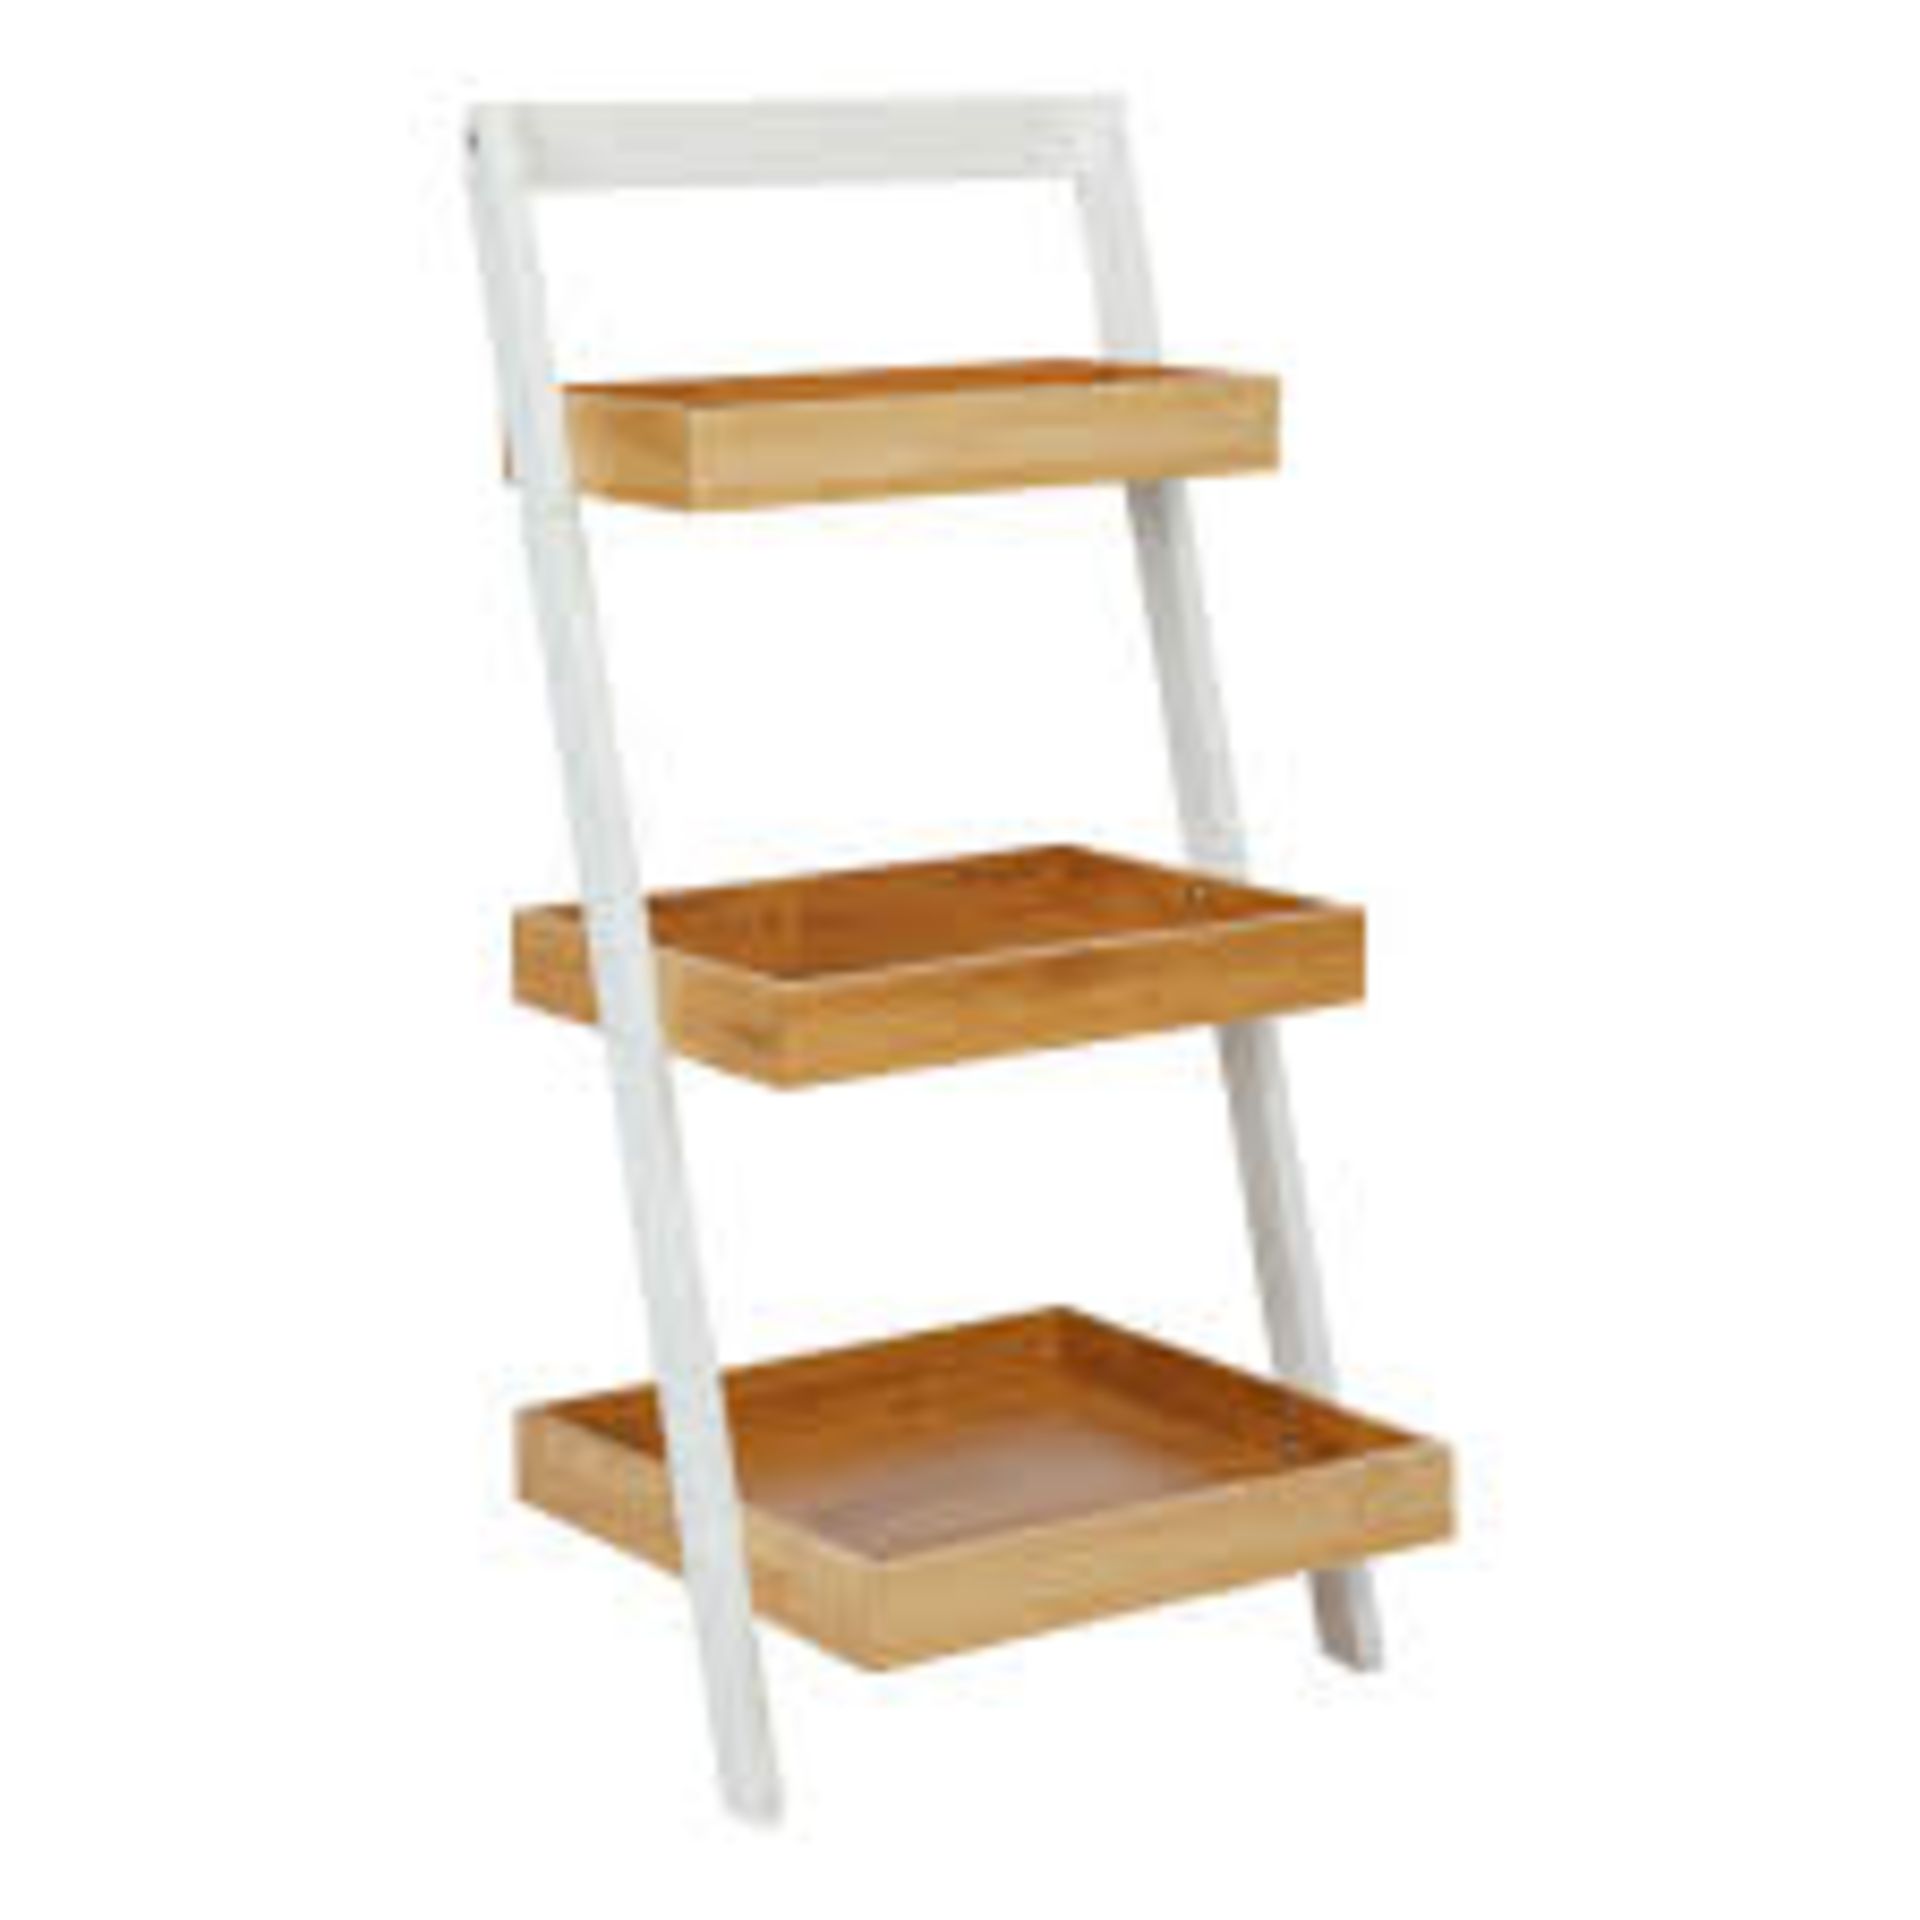 John Lewis And Partners House 3 Tier Shelving Unit RRP £60 (2217637) (Viewings And Appraisals Are